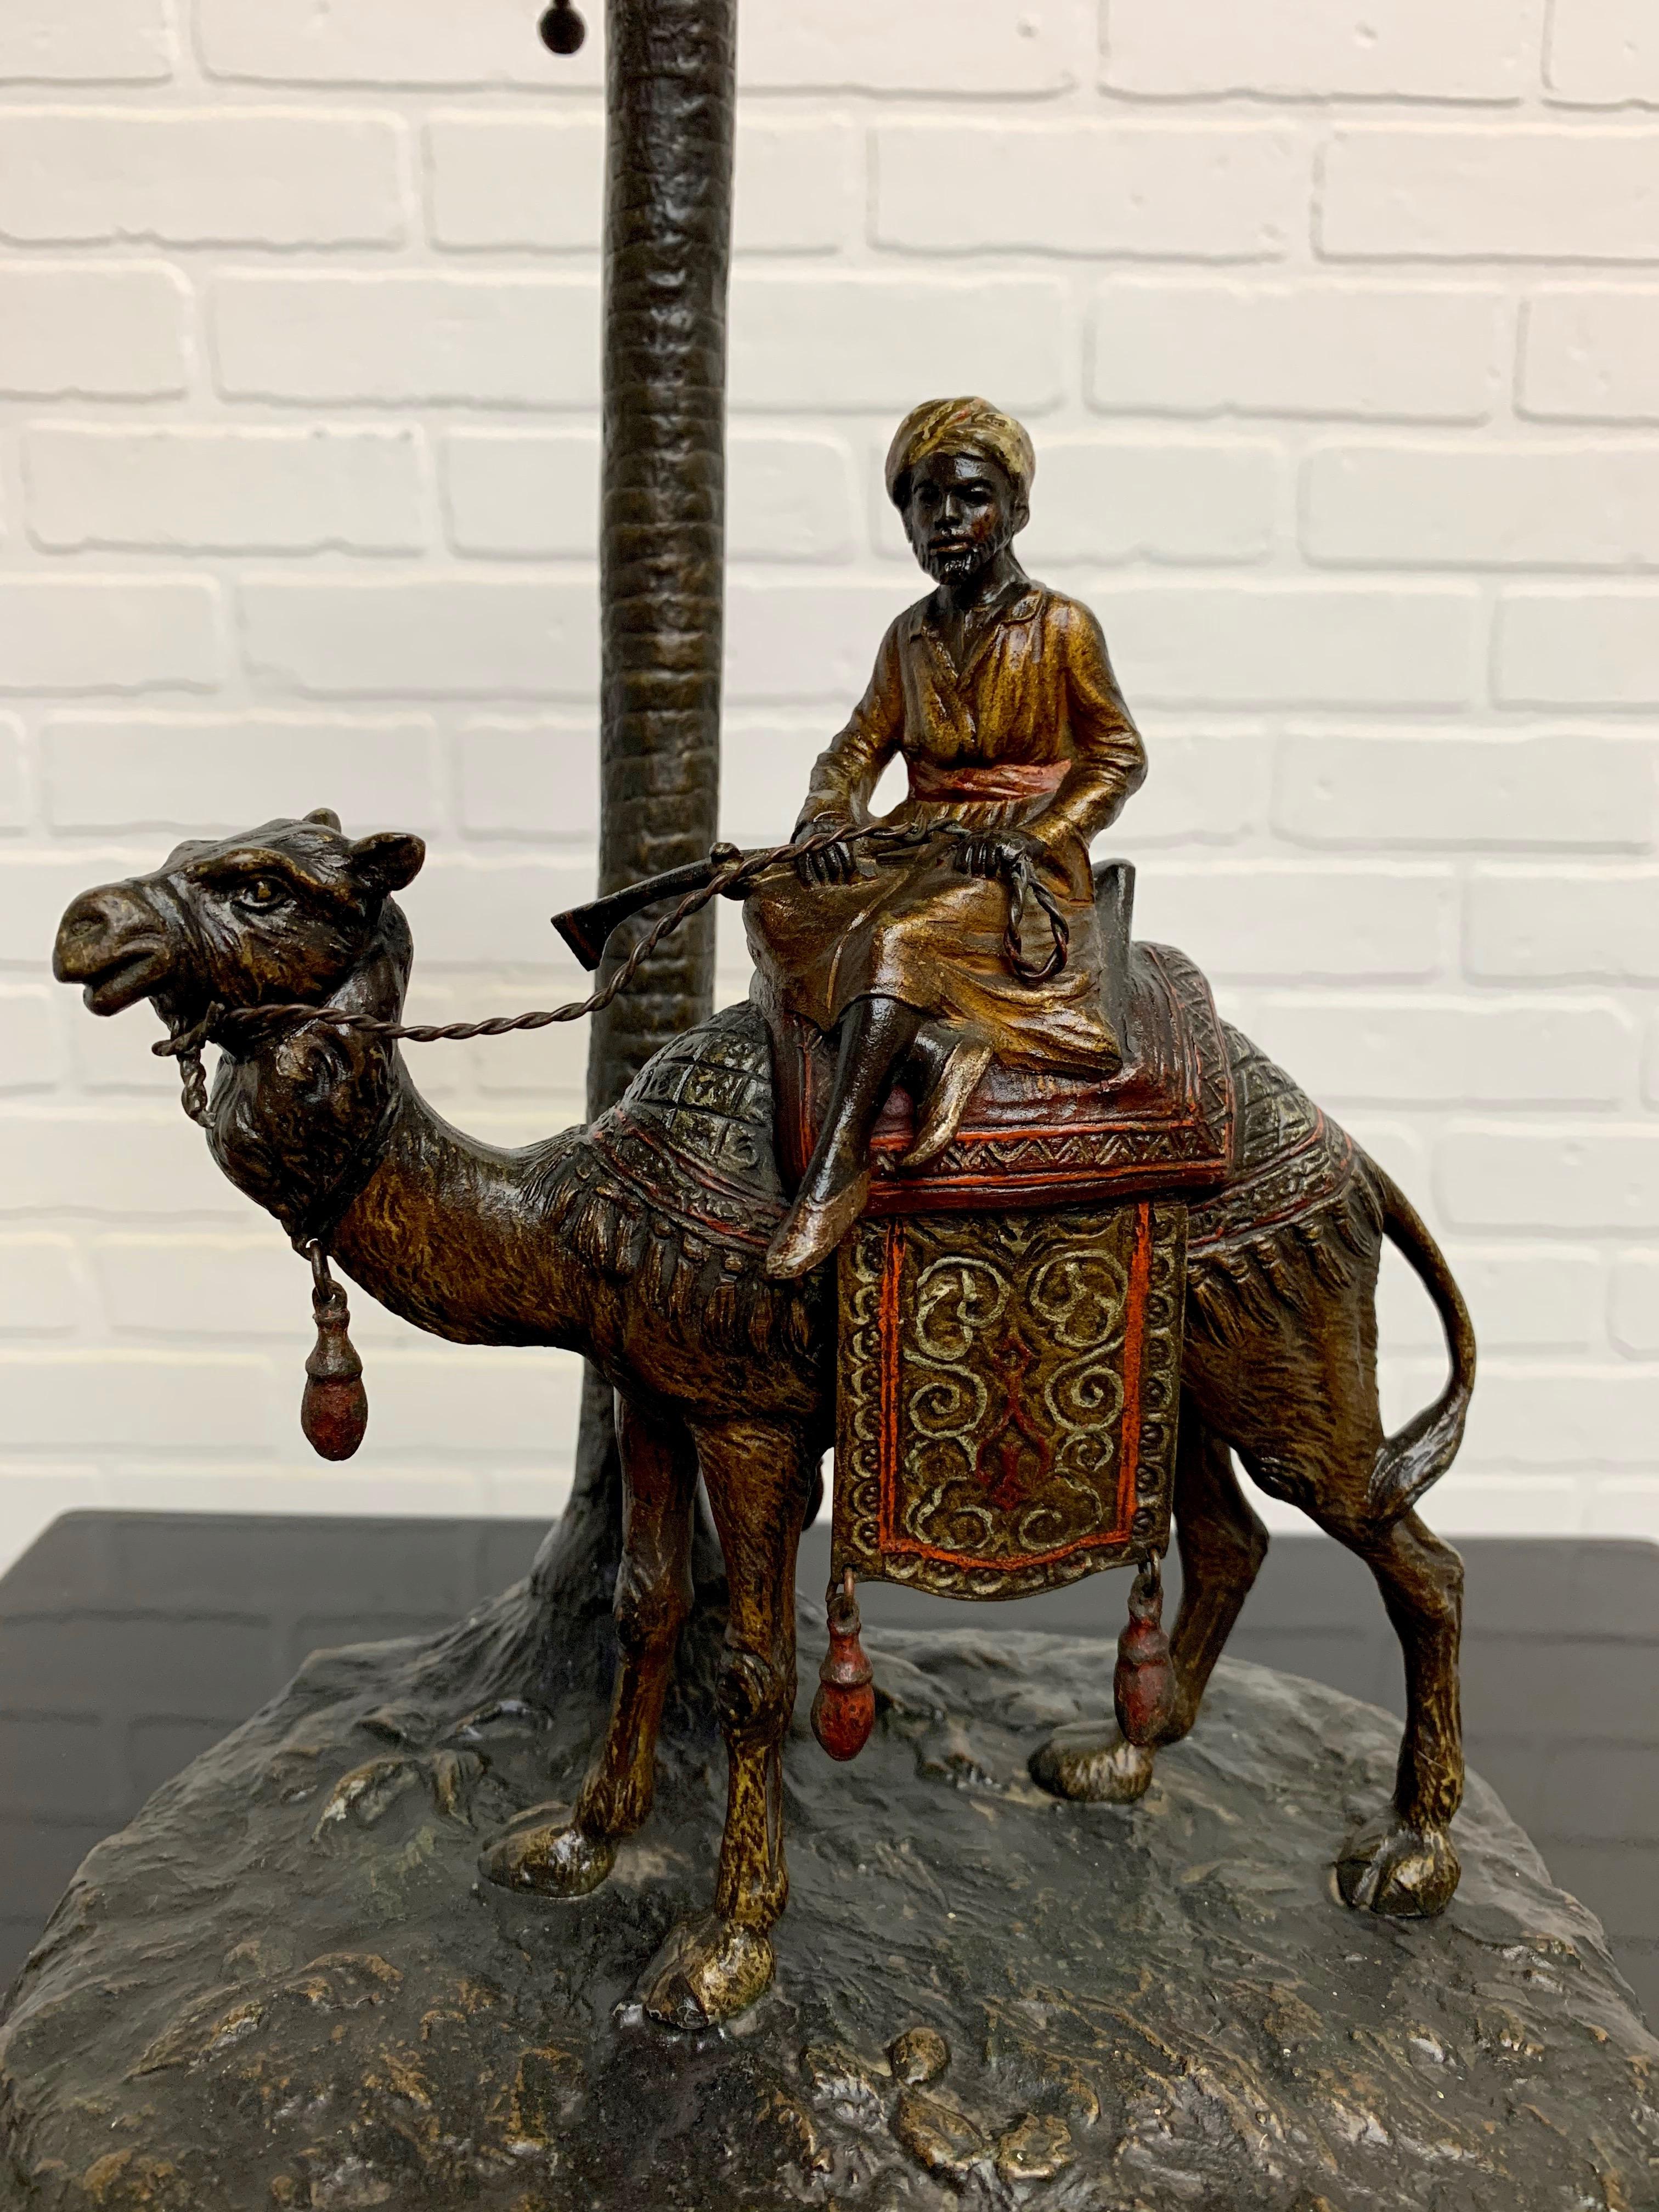 Viennese cold painted bronze orientalist lamp attributed to Bergman of a middle eastern man riding a camel. 
Signed Austria.